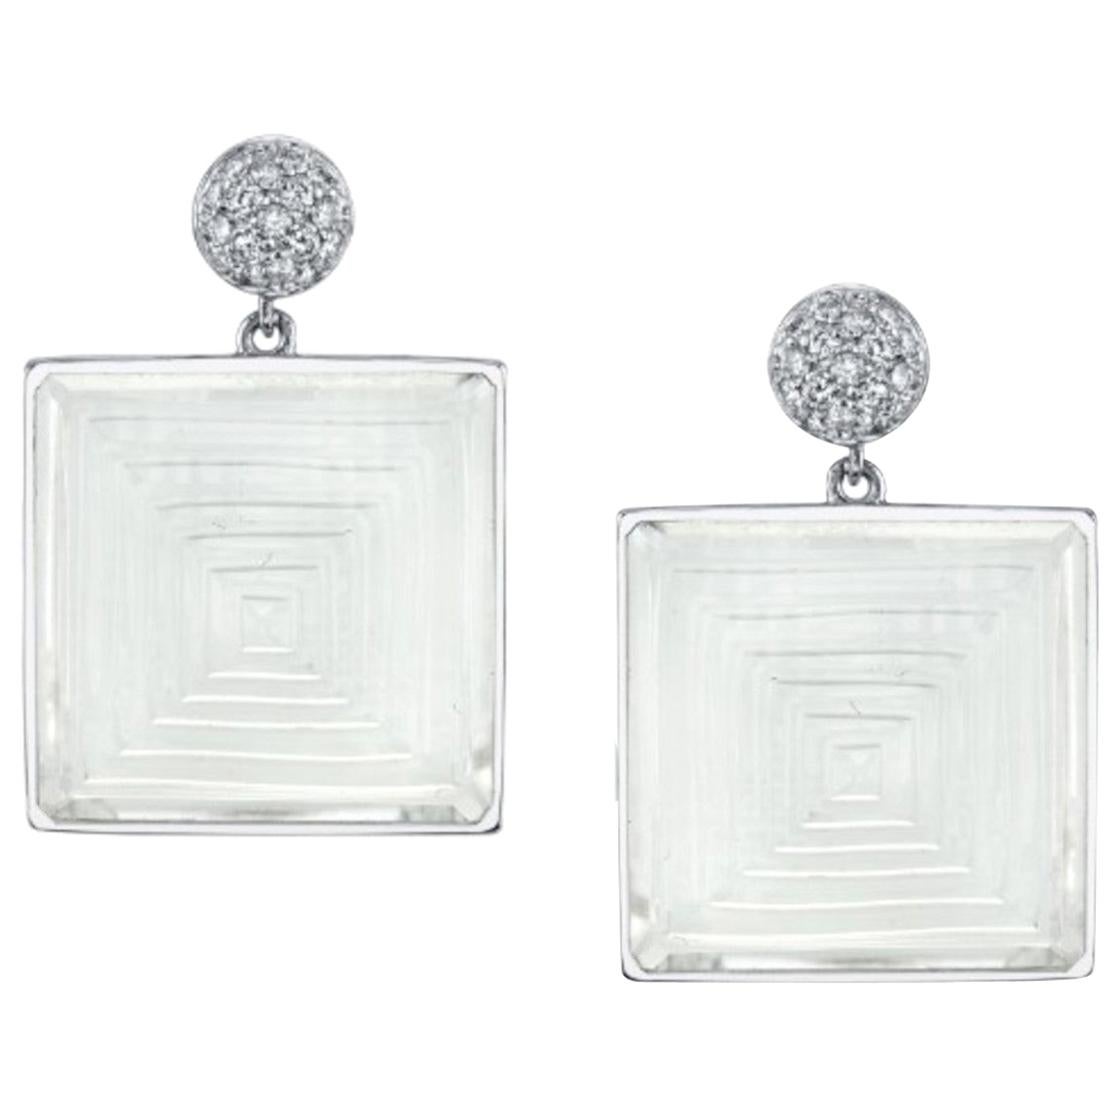 Rock Crystal Pyramid and Diamond Drop Earrings in White Gold, 48 Carats Total